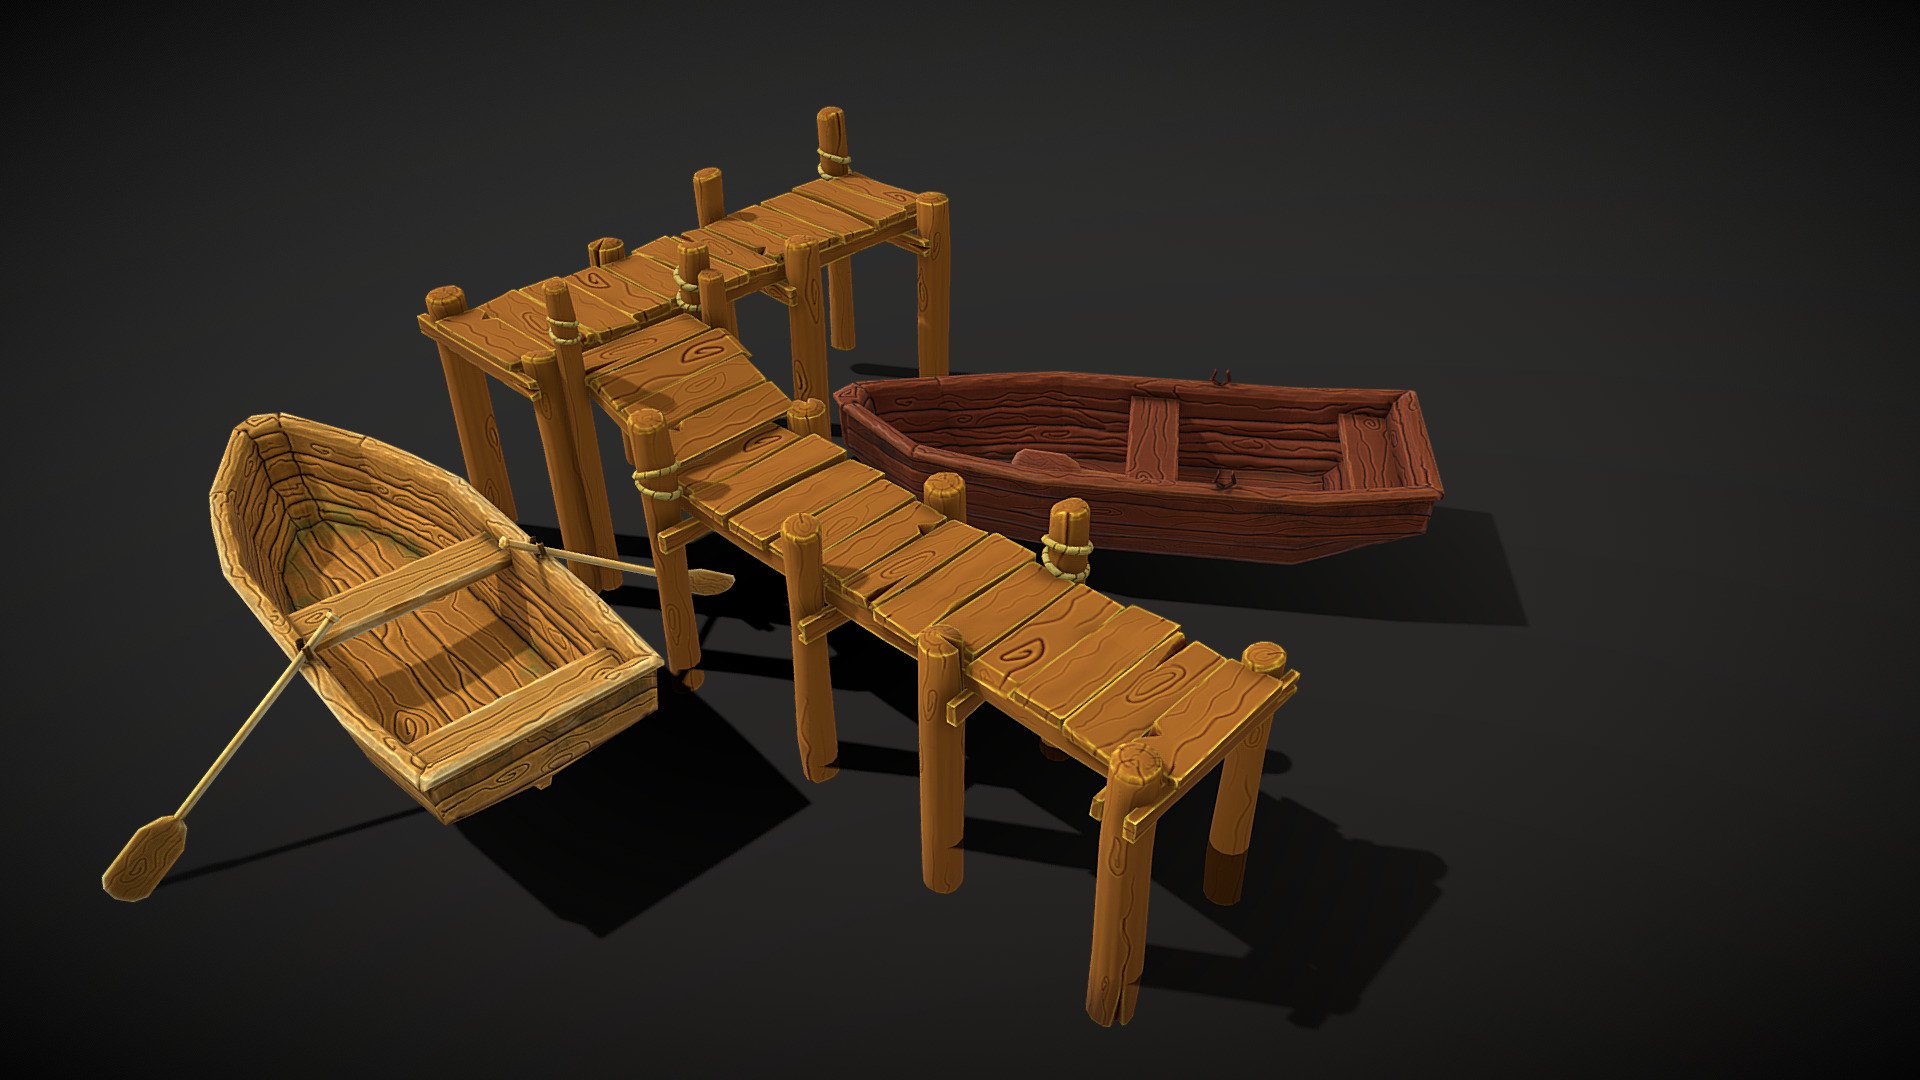 Stylized handpainted port harbor game asset with fishing pier and boats. Game ready asset for fisherman's village or seaside environment. 

Boat comes with 4K PNG Color, Roughness and Normal map textures. Color texture has lighter and darker wood shade. 

 Pier comes with 4k PNG textures of Color and Normal. 
 Blender .blen and .obj files are in zip archive 3d model